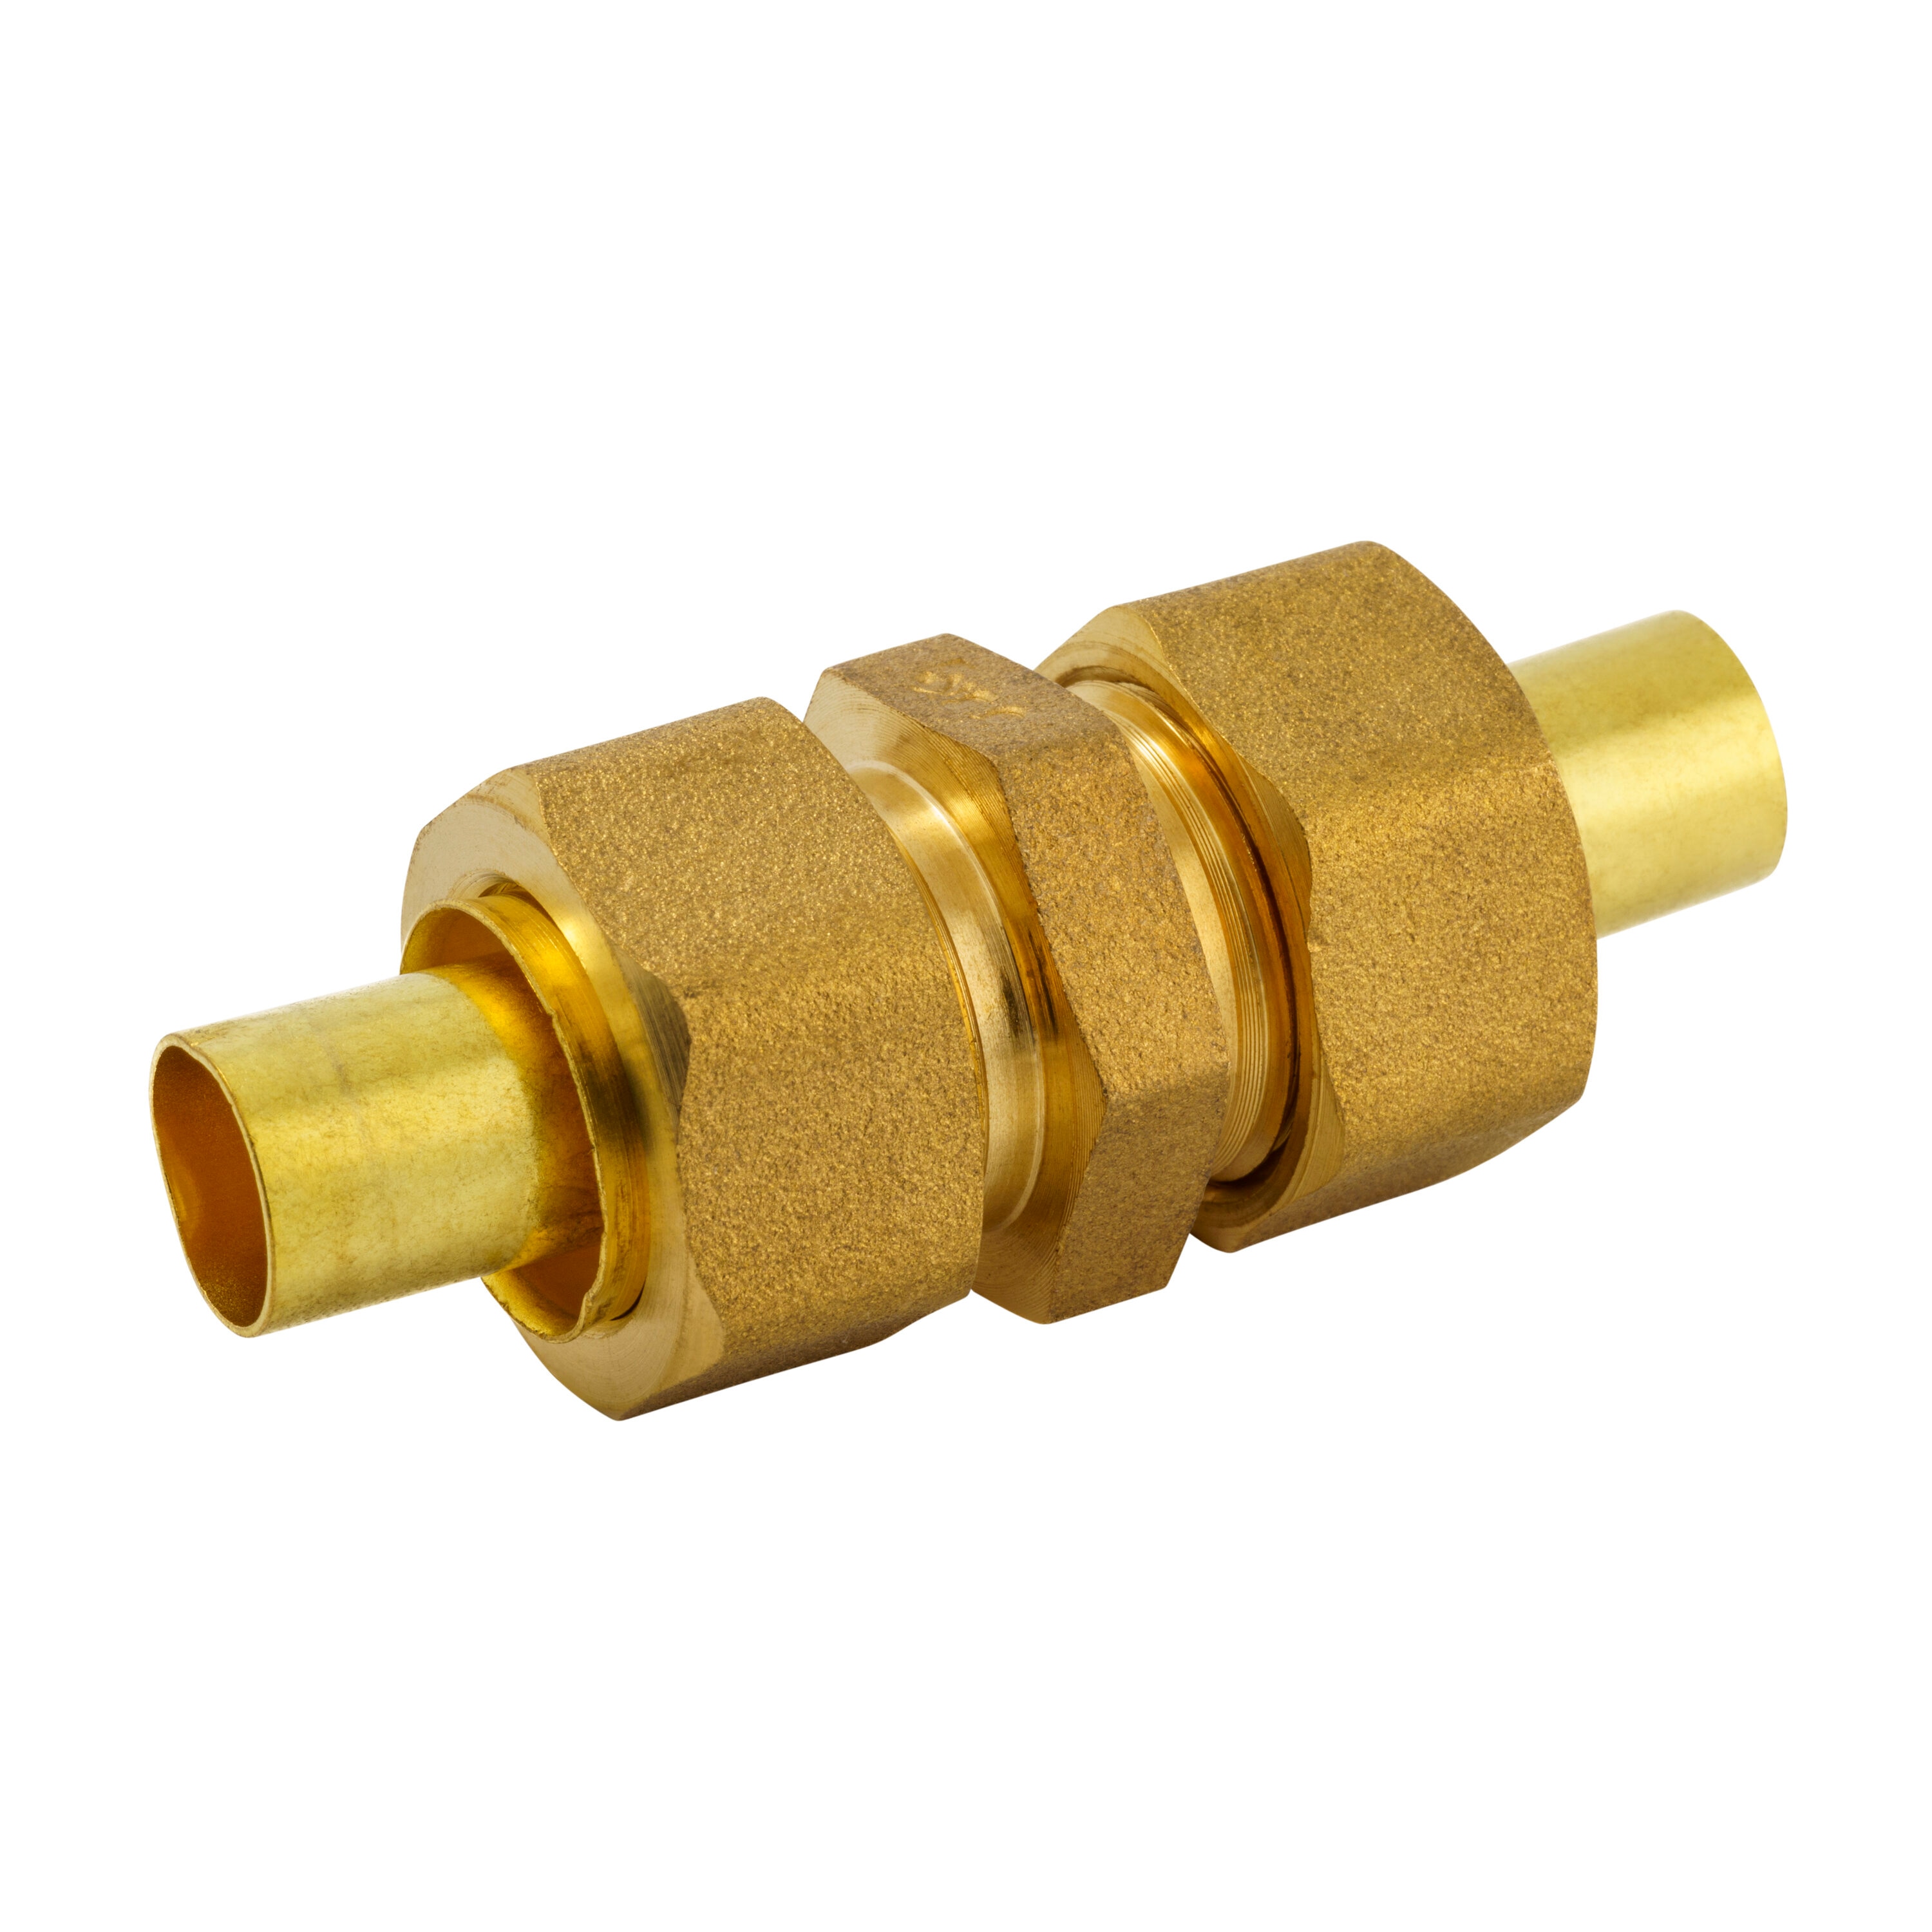 Copper Pipe Quick Connect Fittings - No Soldering or Compression